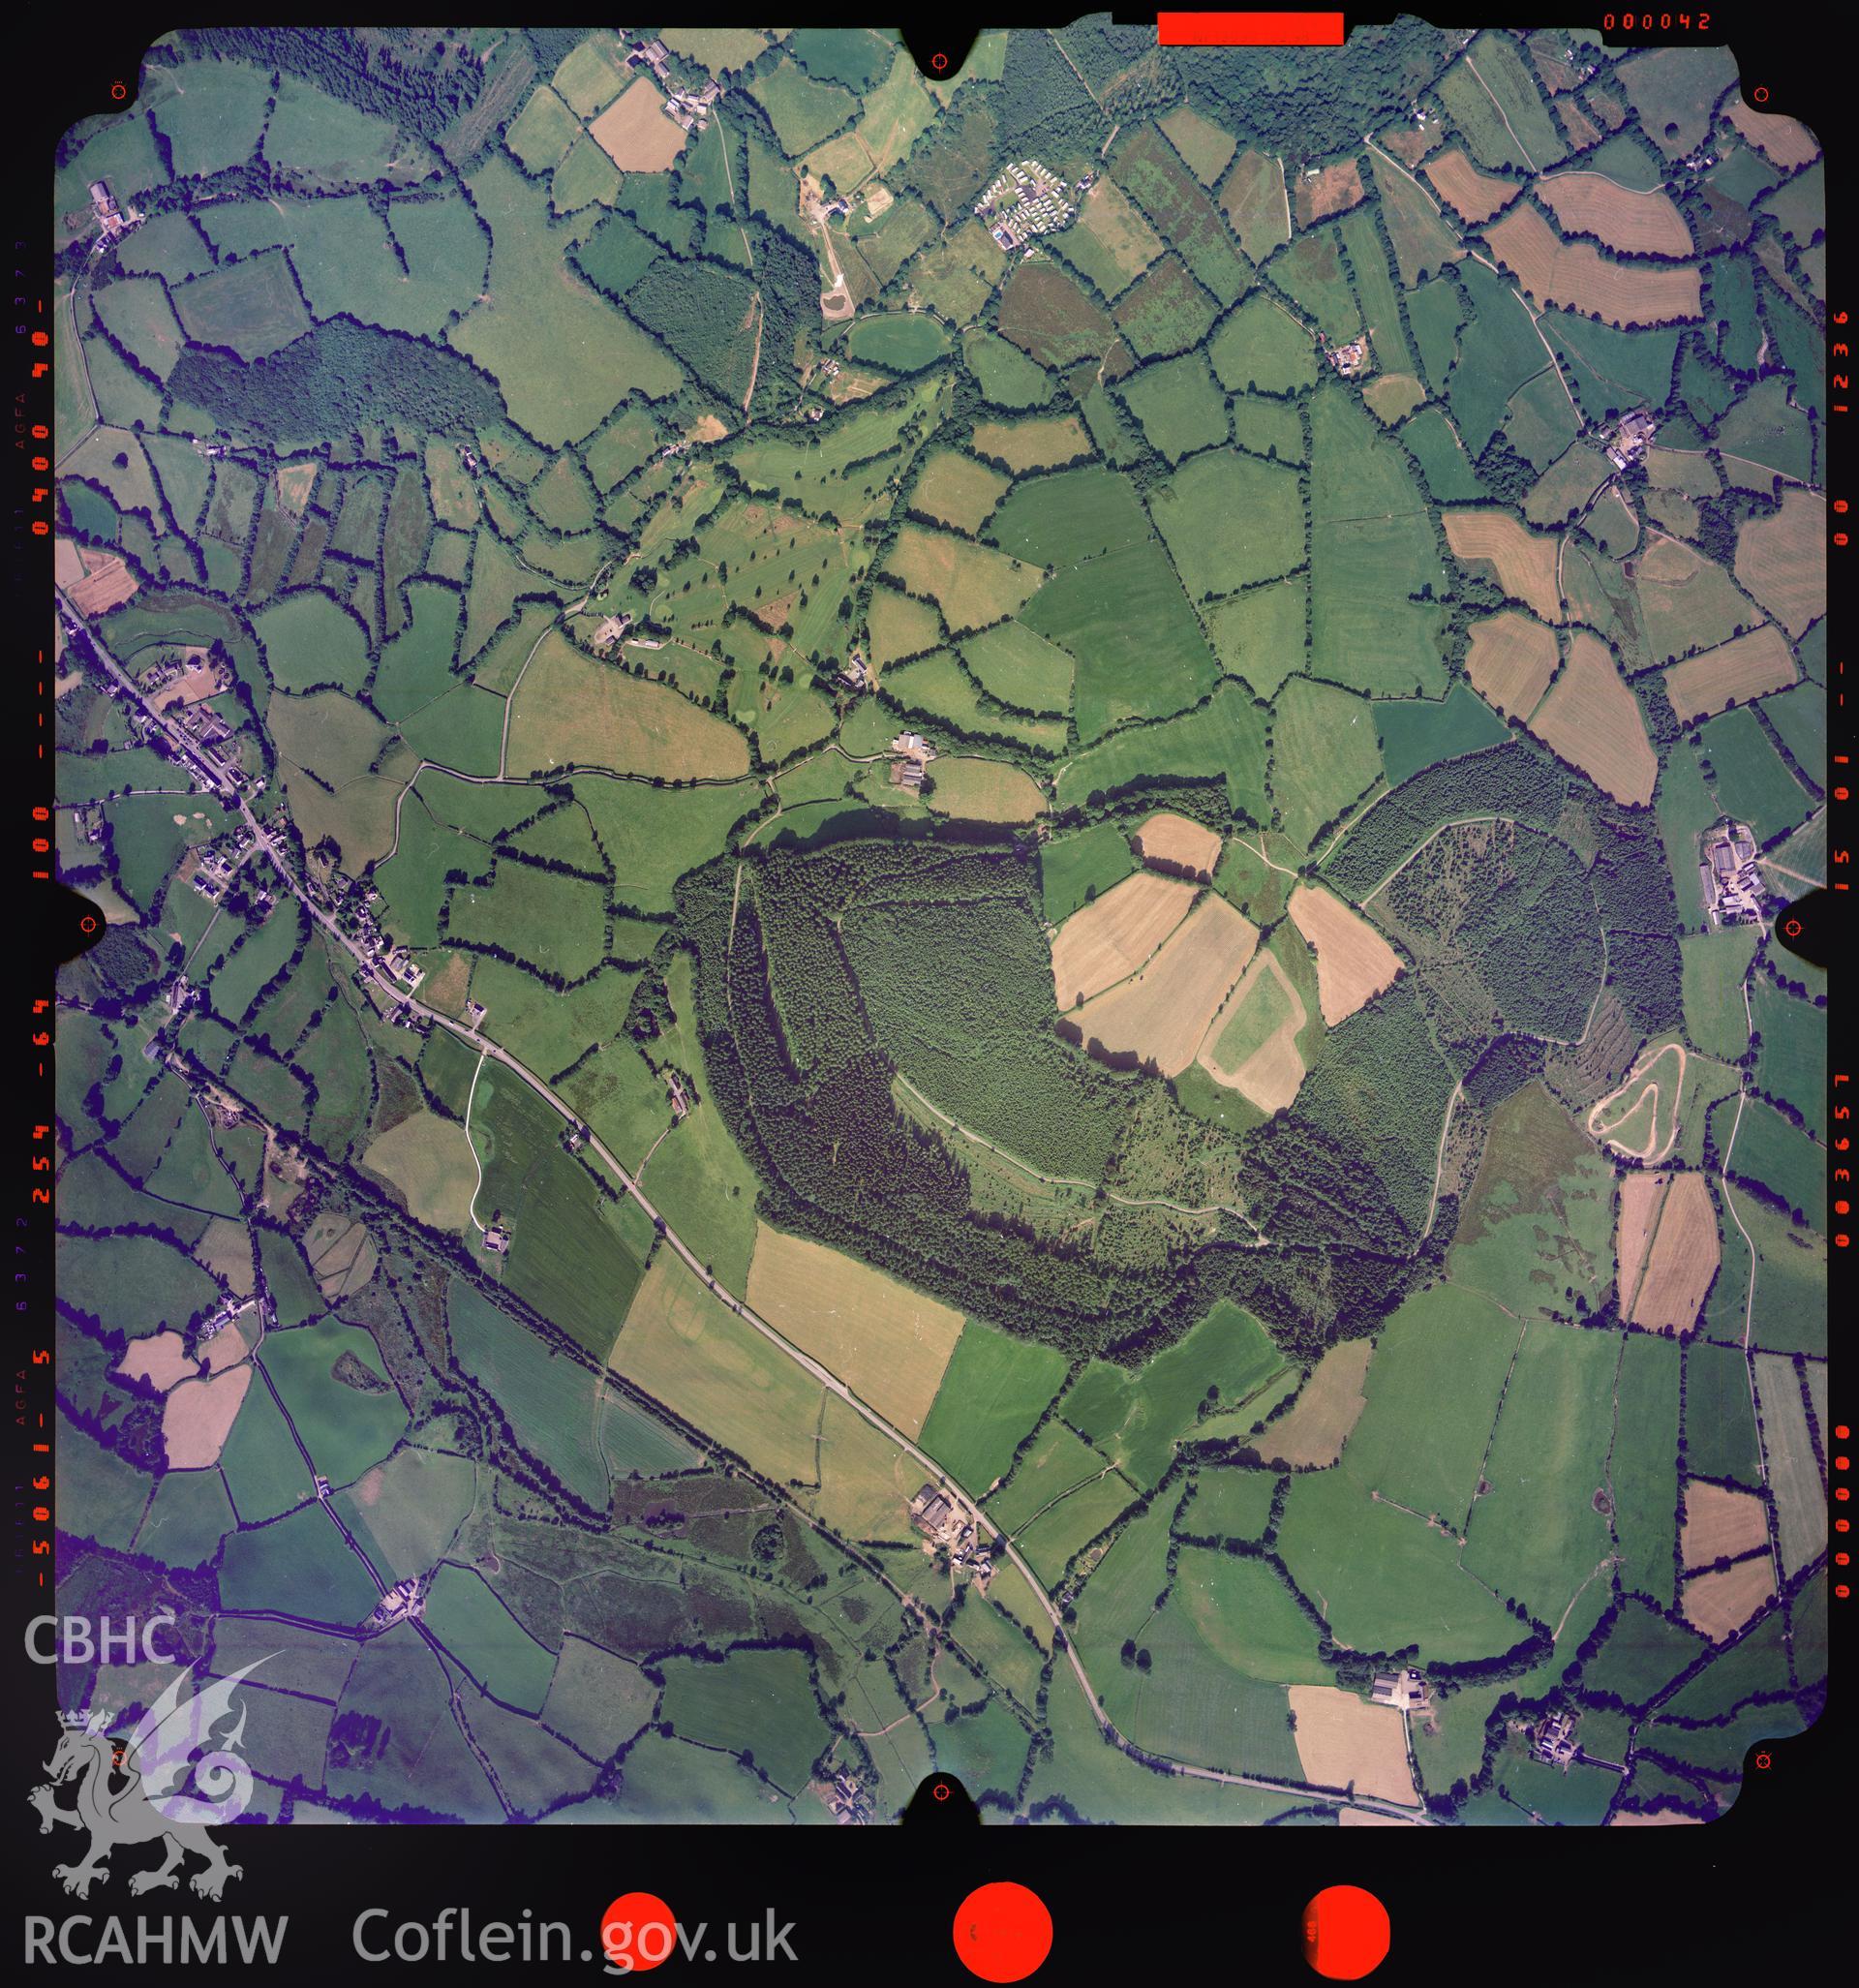 Digitized copy of a colour aerial photograph showing an area in Ceredigion, taken by Ordnance Survey, 2005.